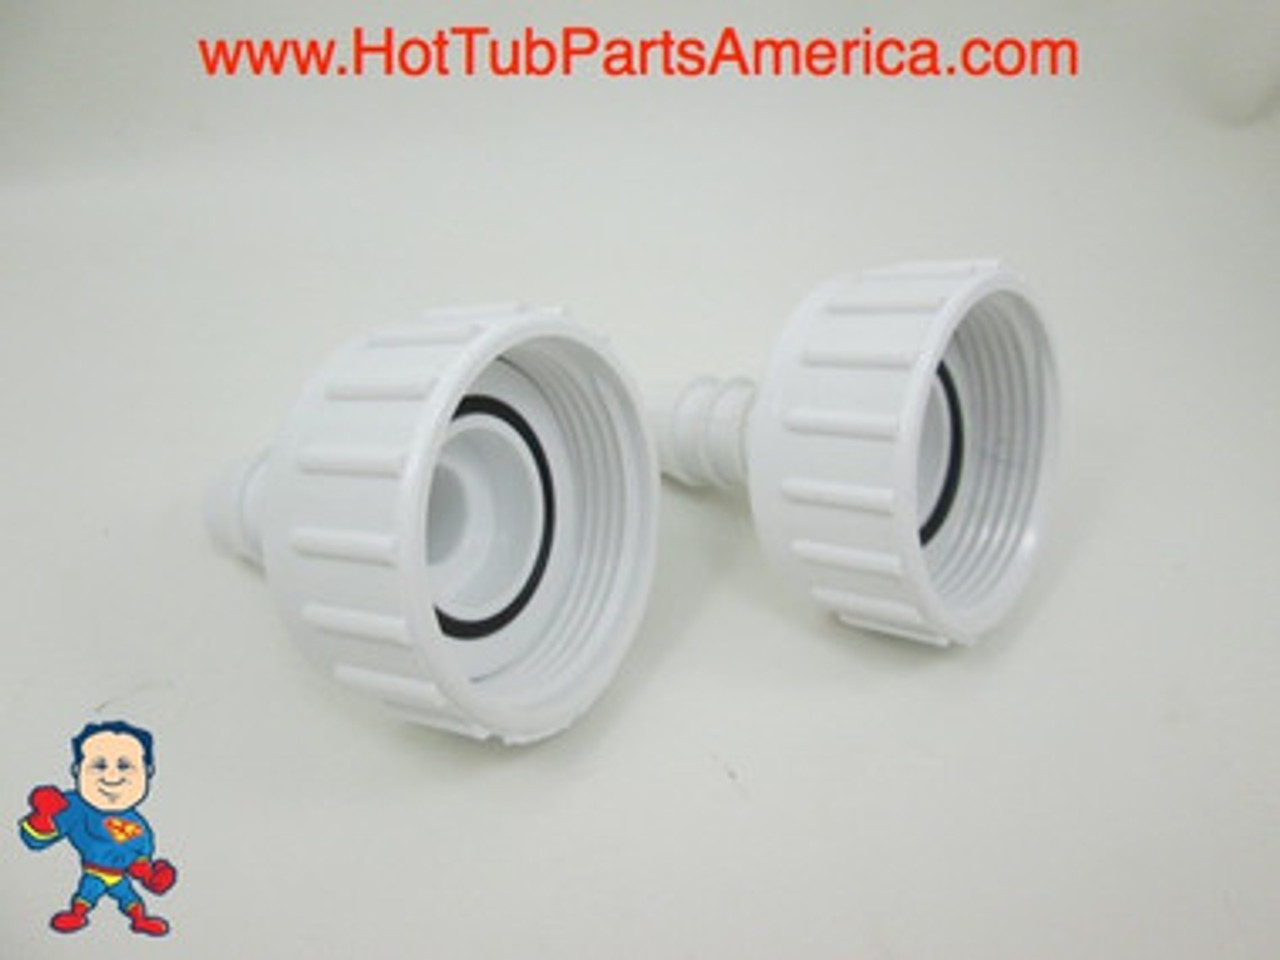 Set of 2 Hot Tub Spa 1" X 3/4" Barb Pump Union O-Ring use Tiny Might other Video